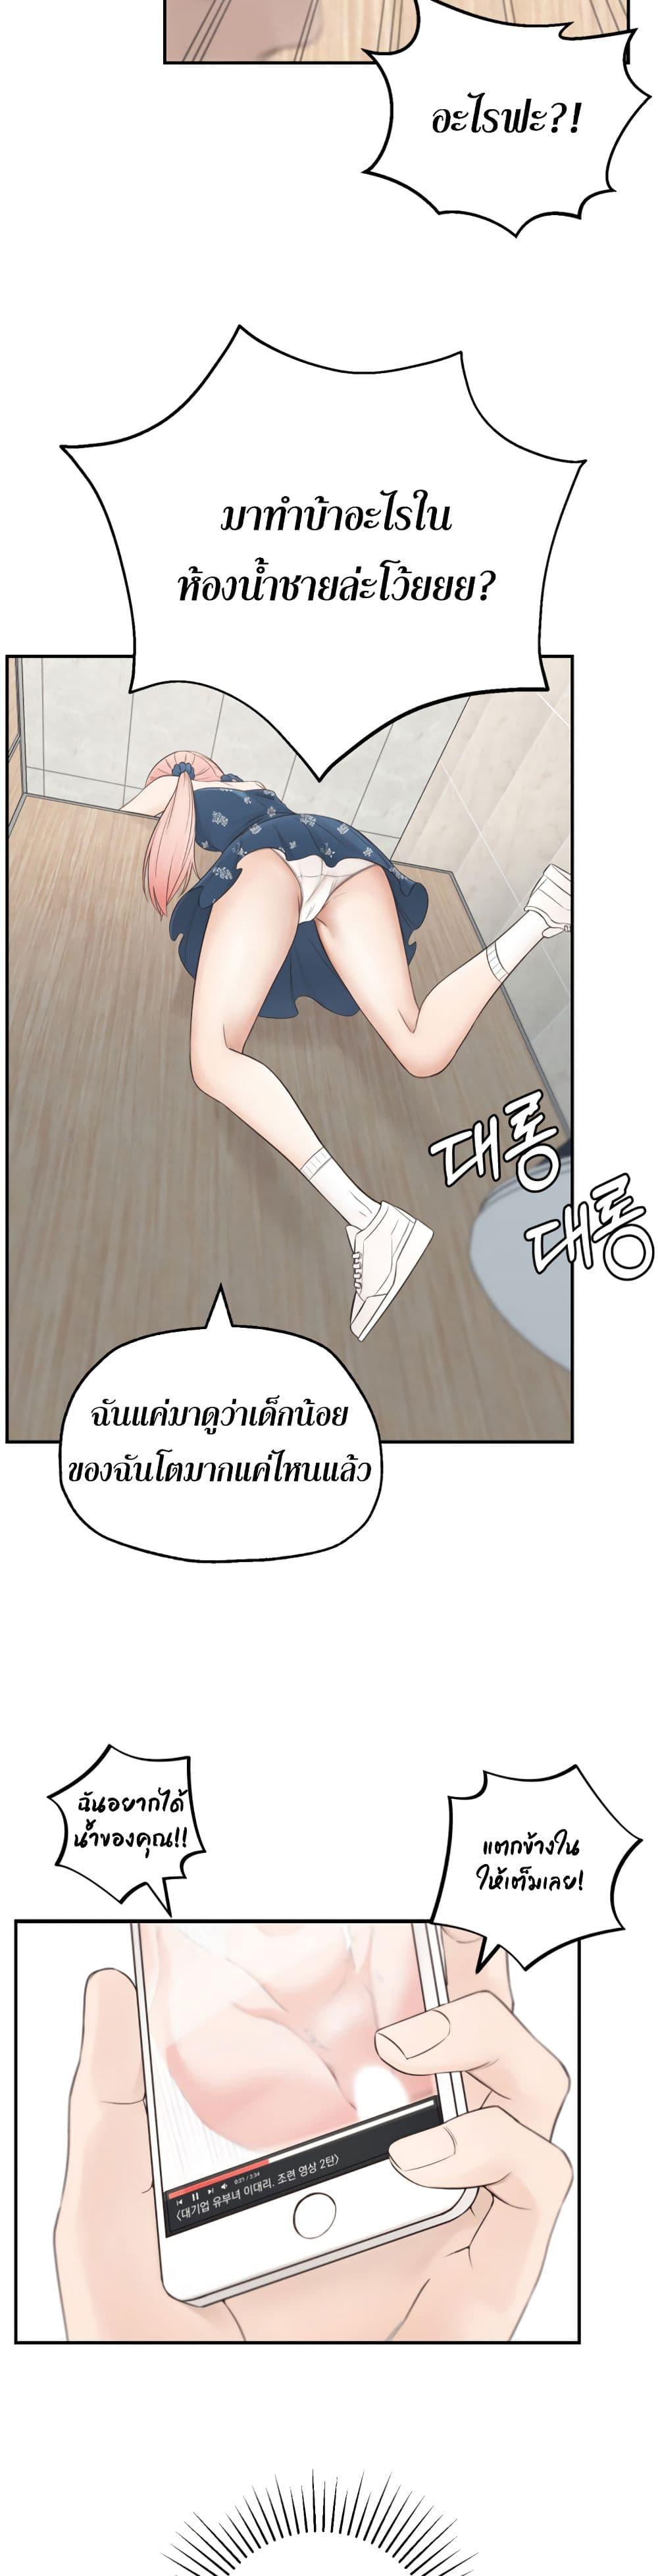 A Knowing Sister 1 ภาพ 17